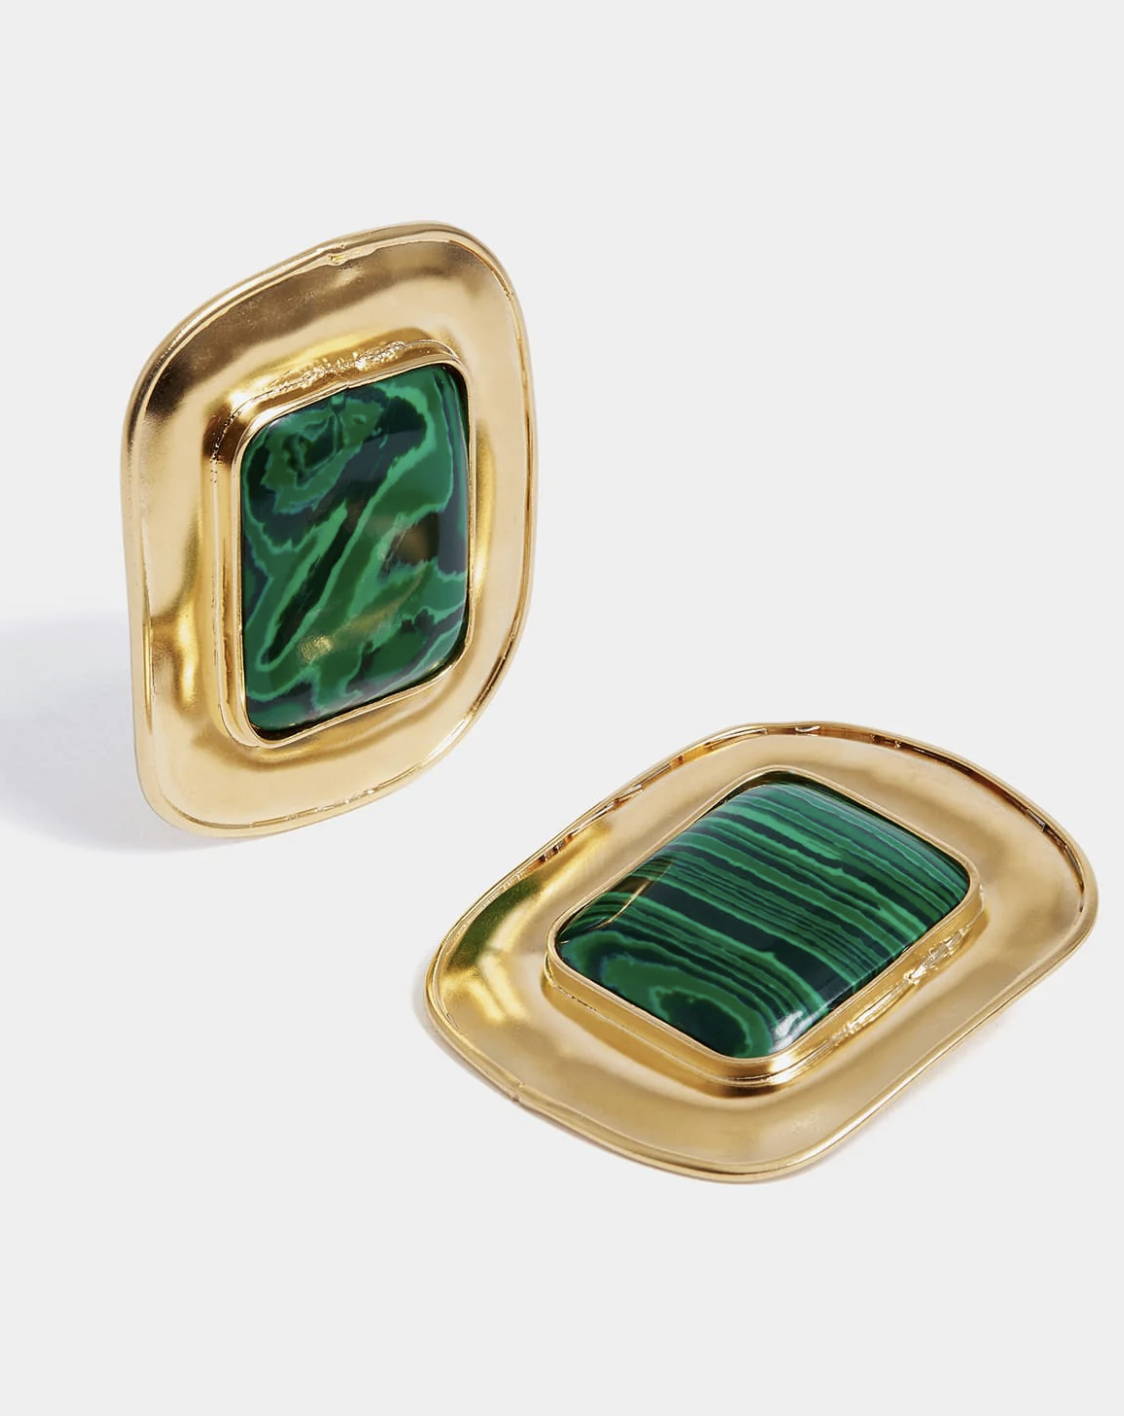 SORU X SOMETHING NAVY ARIELLE CHARNAS GREEN MALACHITE ESME EARRINGS 18ct gold plated solid silver and malachite paste